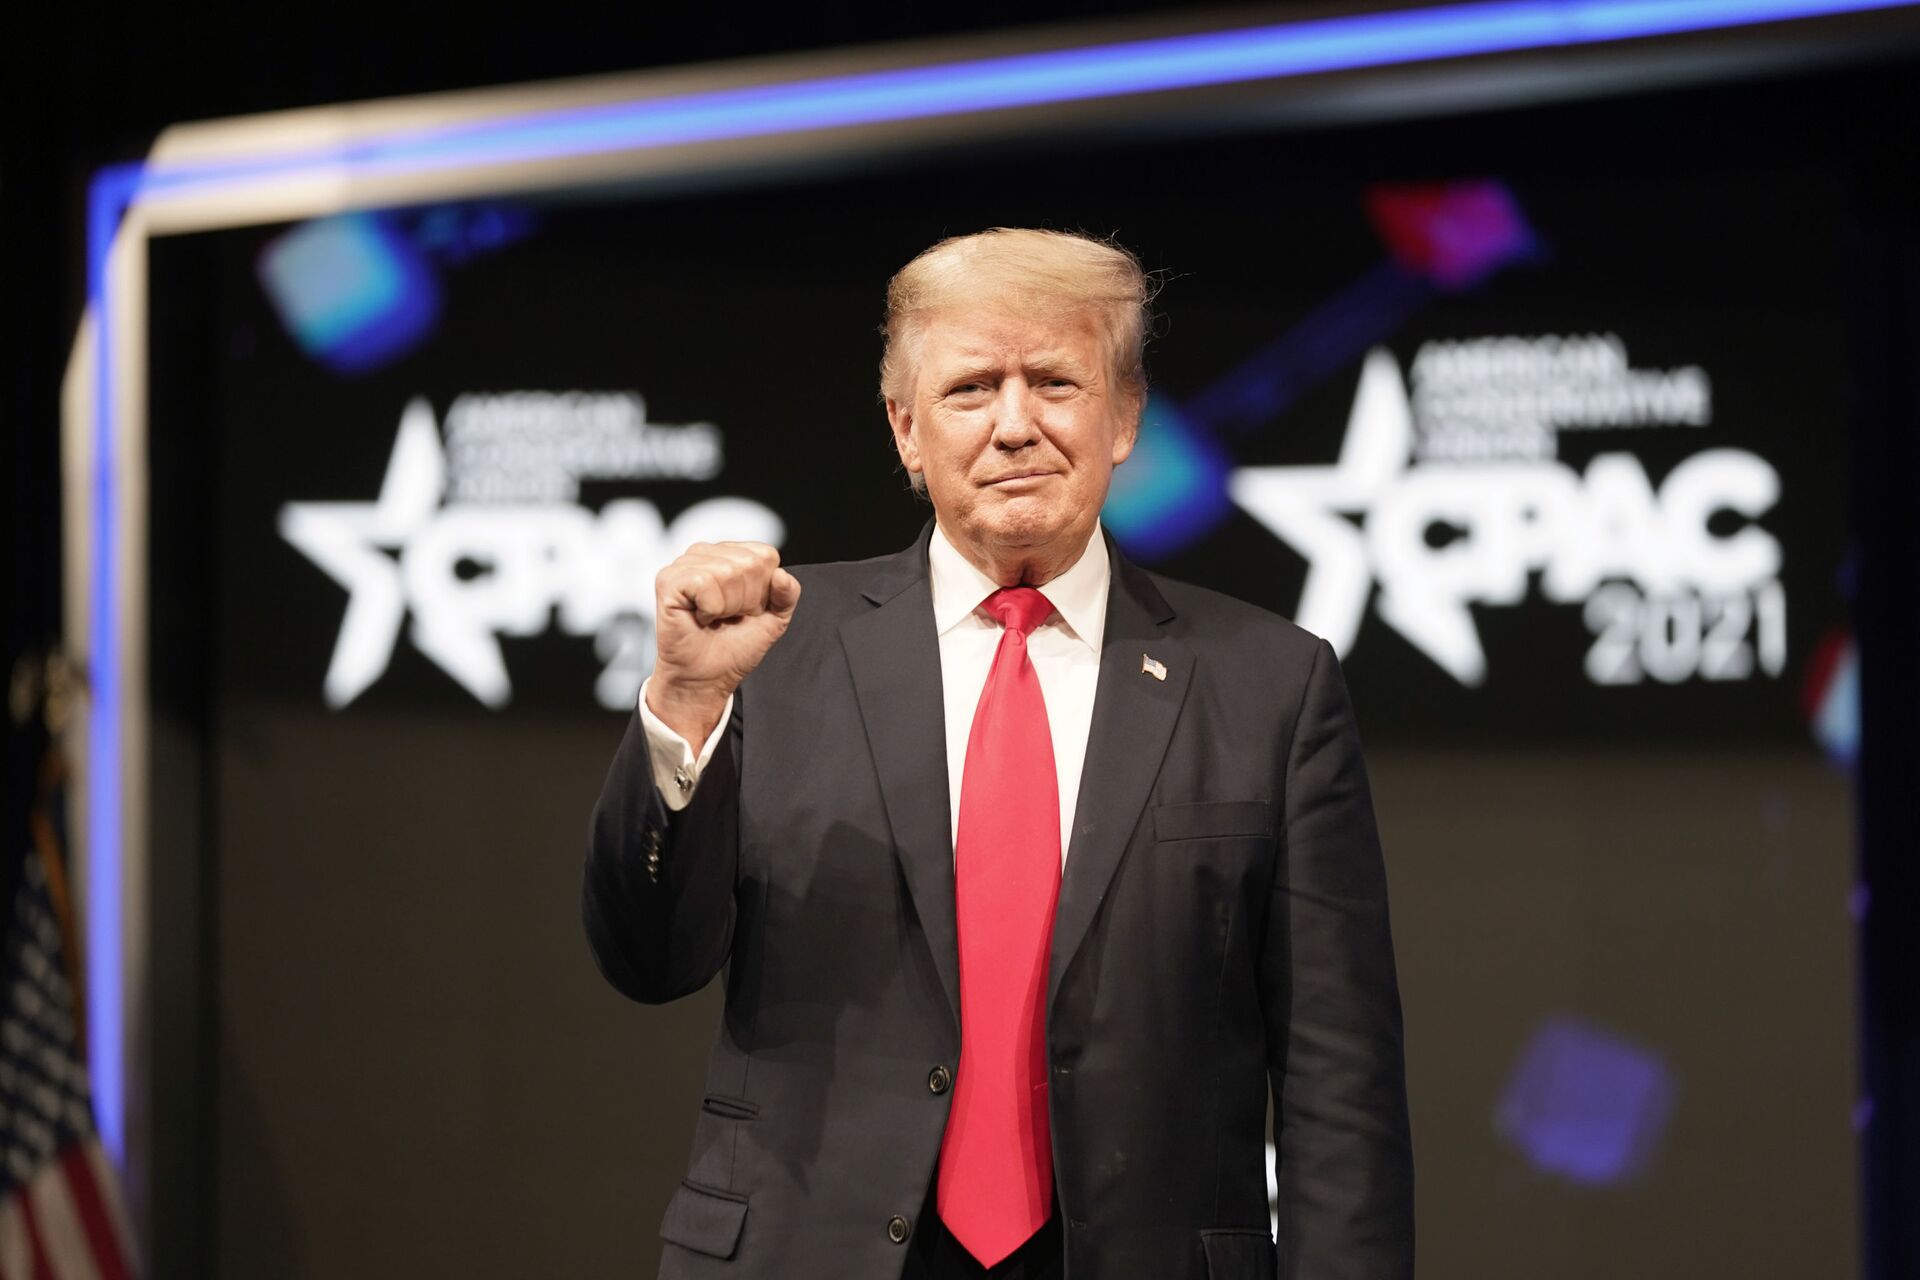 Former president Donald Trump raises his fist before speaking at the Conservative Political Action Conference (CPAC) Sunday, July 11, 2021, in Dallas.  - Sputnik International, 1920, 07.09.2021